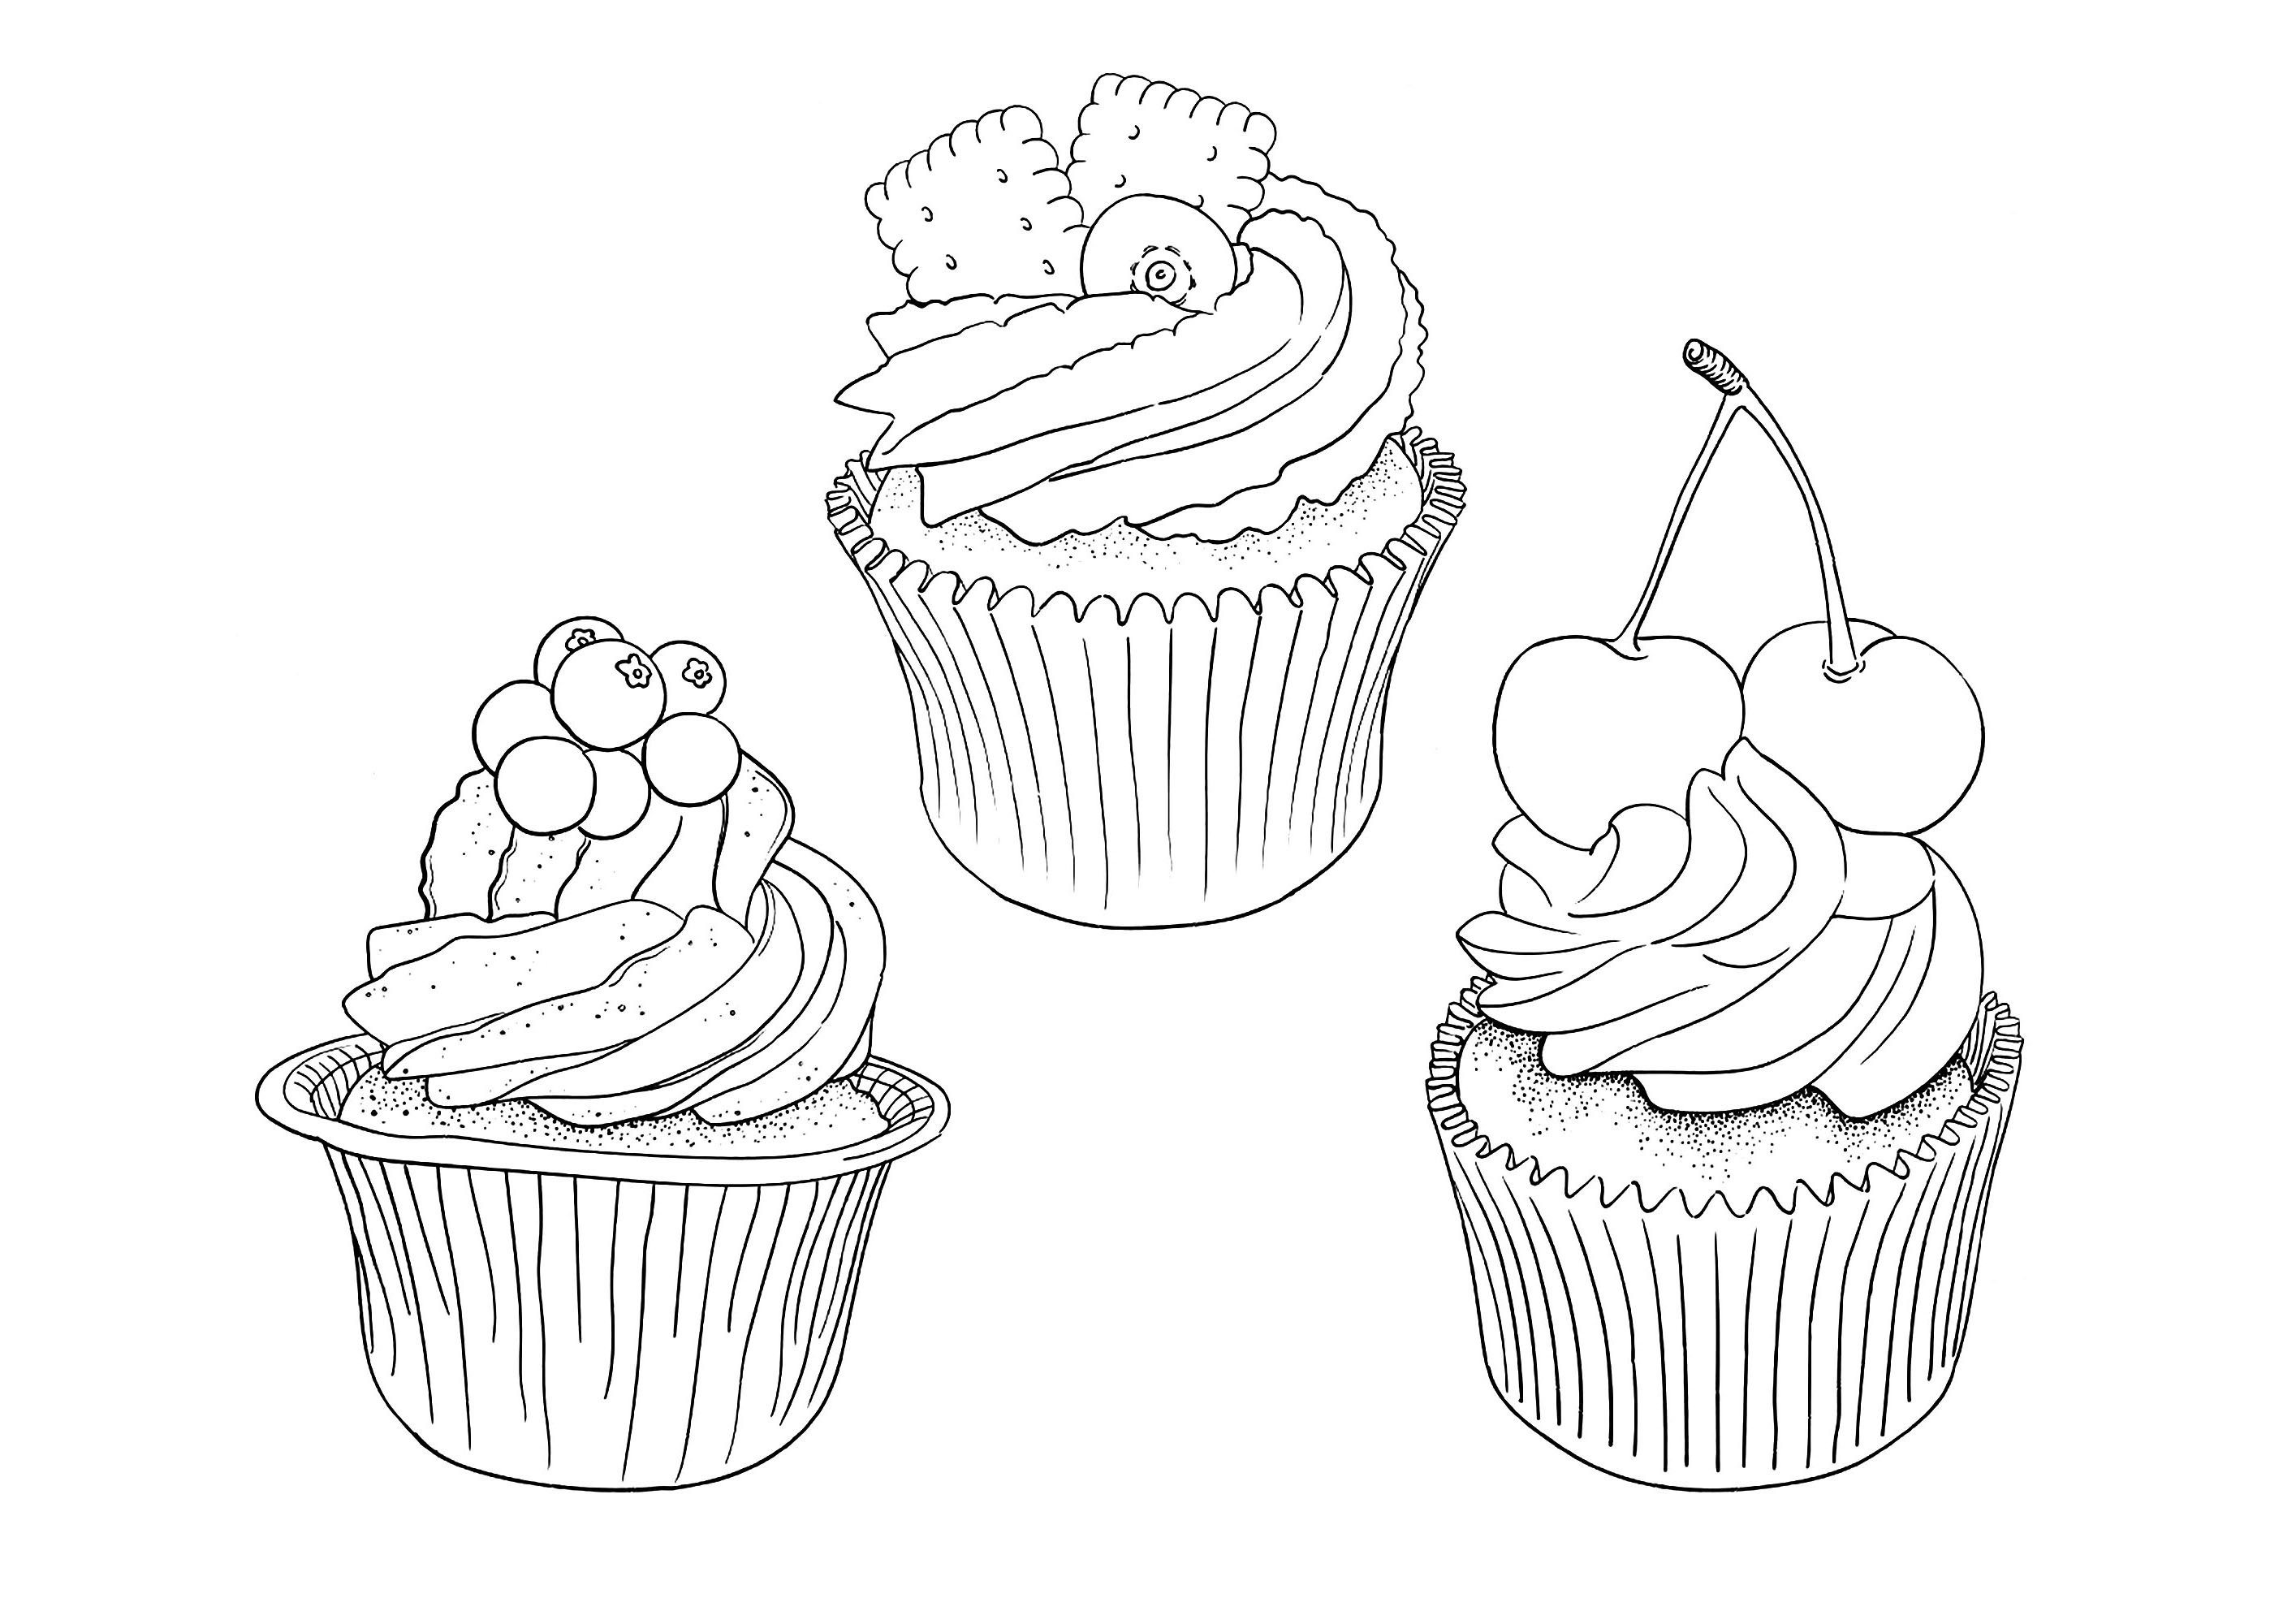 Cupcakes and cakes free to color for children - Cupcakes And Cakes Kids